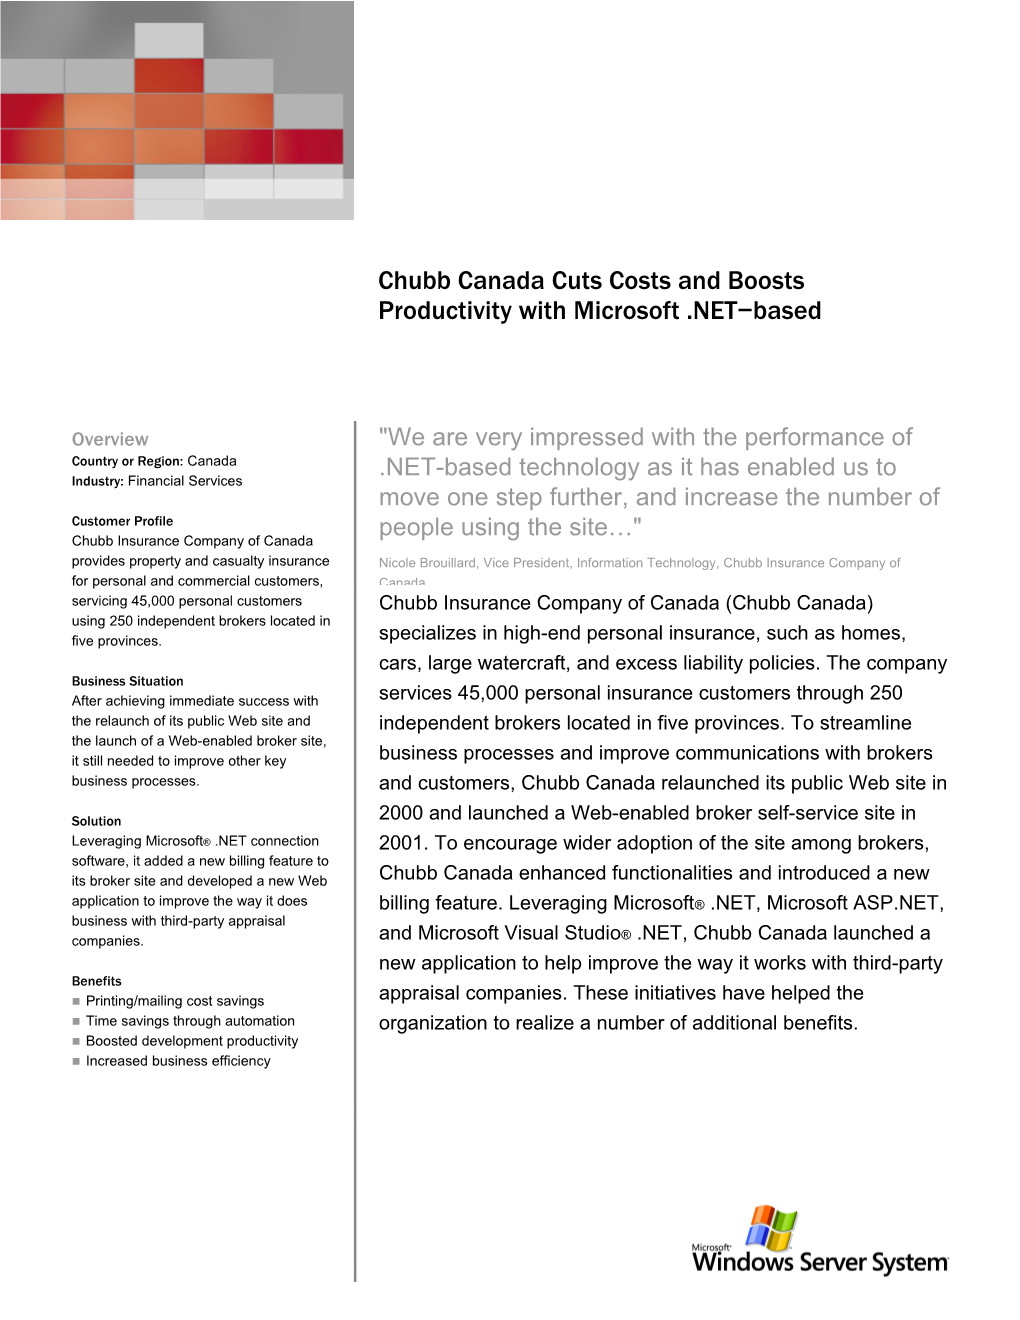 Chubb Canada Cuts Costs and Boosts Productivity with Microsoft .NET Based Technology